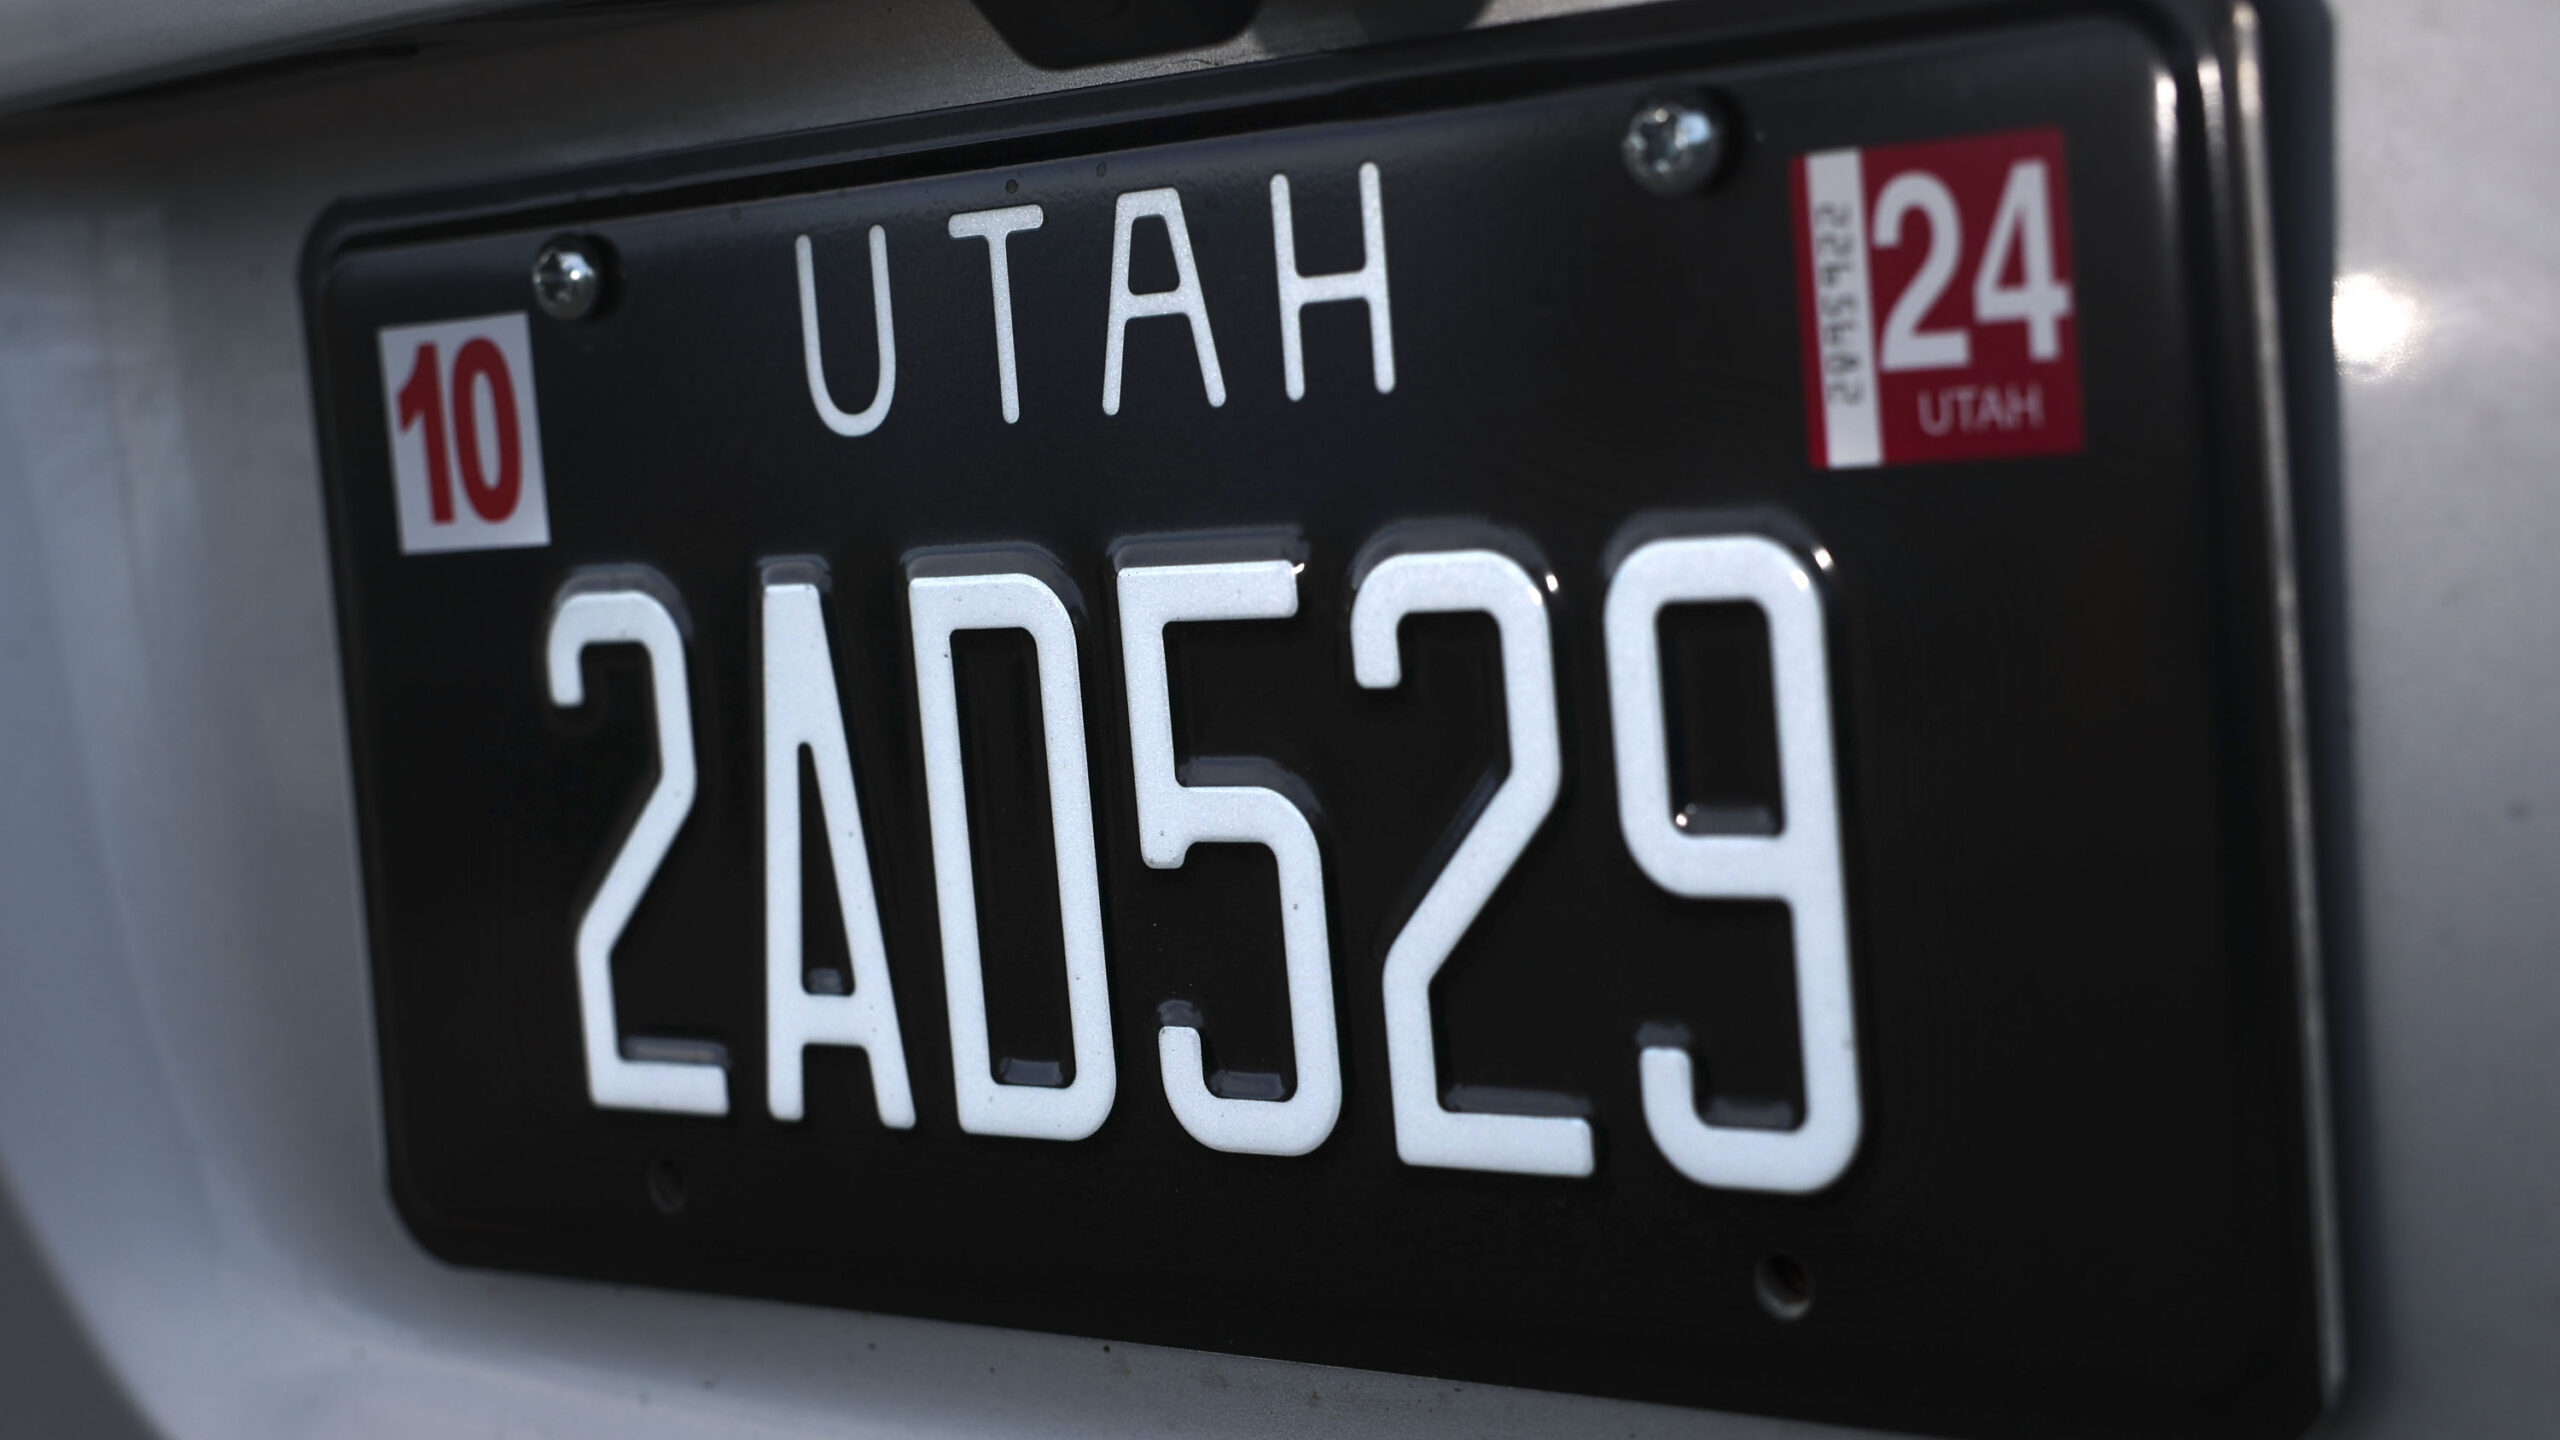 Black Utah license plate with registration stickers...